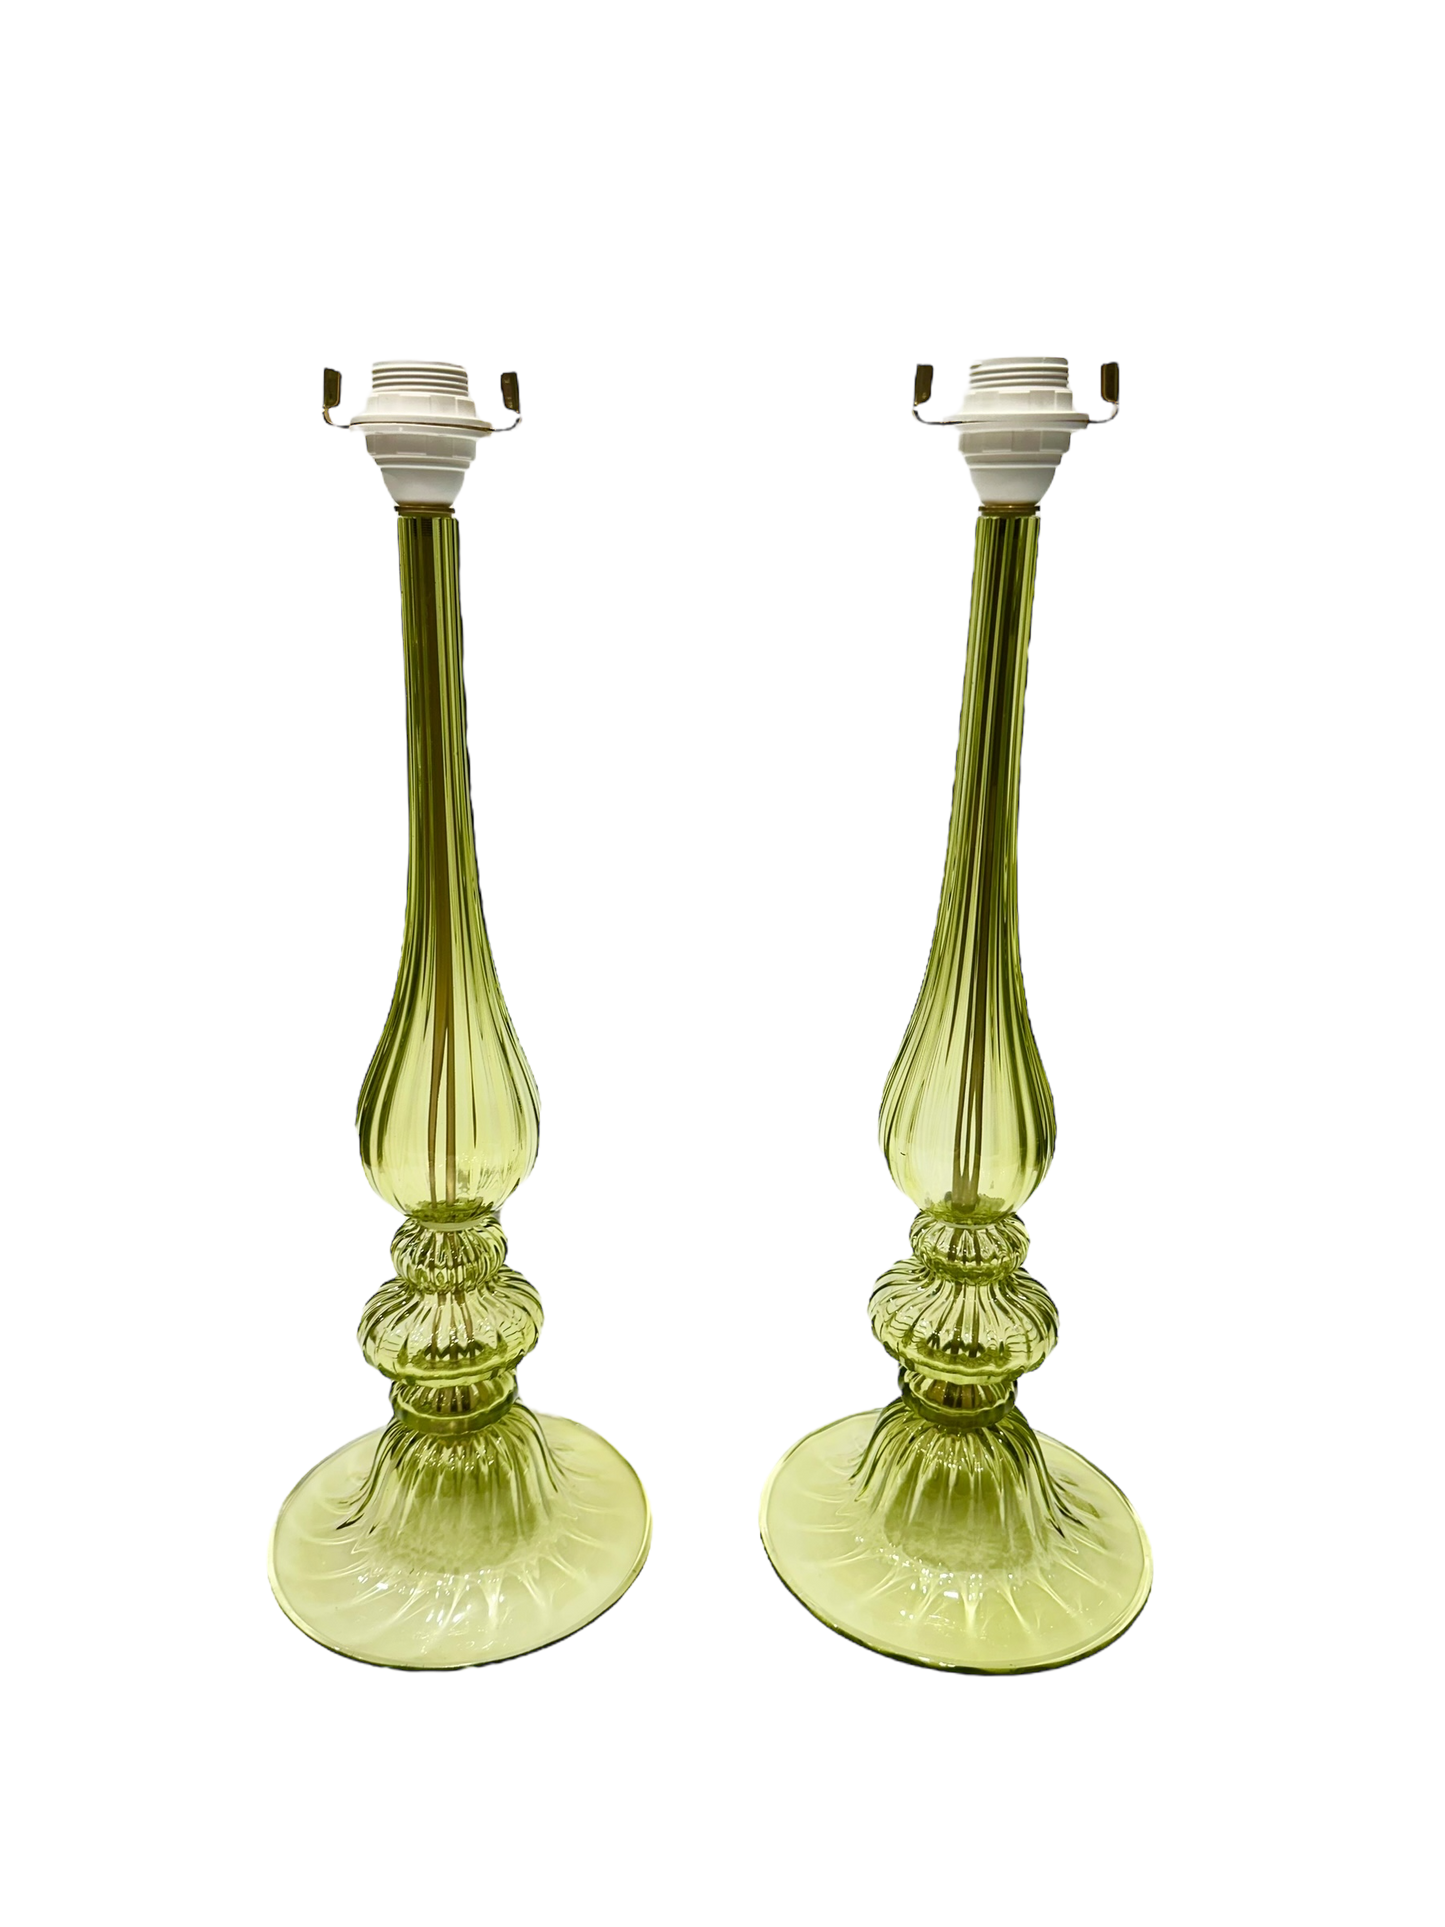 Pair of Baluster Murano Lamps in Lime